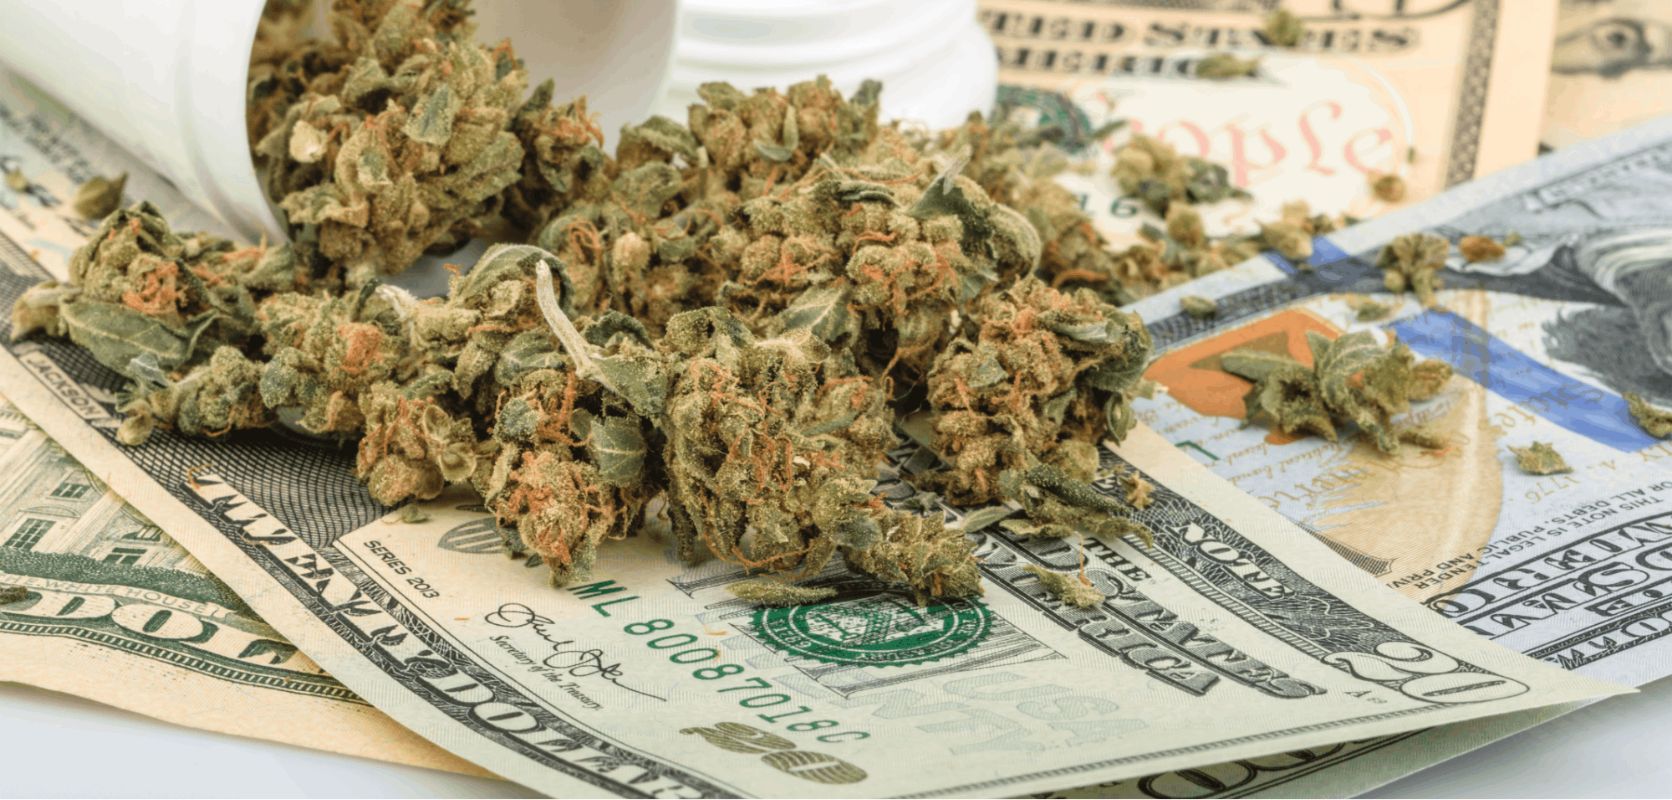 Buy weed online today - buy cheap weed without taking a chance with the overall quality. Trust us, wholesale weed in Canada has never been this tasty and potent! Read on.